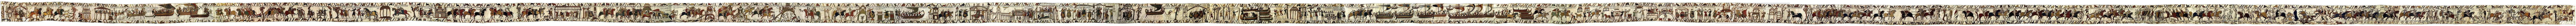 Bayeux Tapestry Full